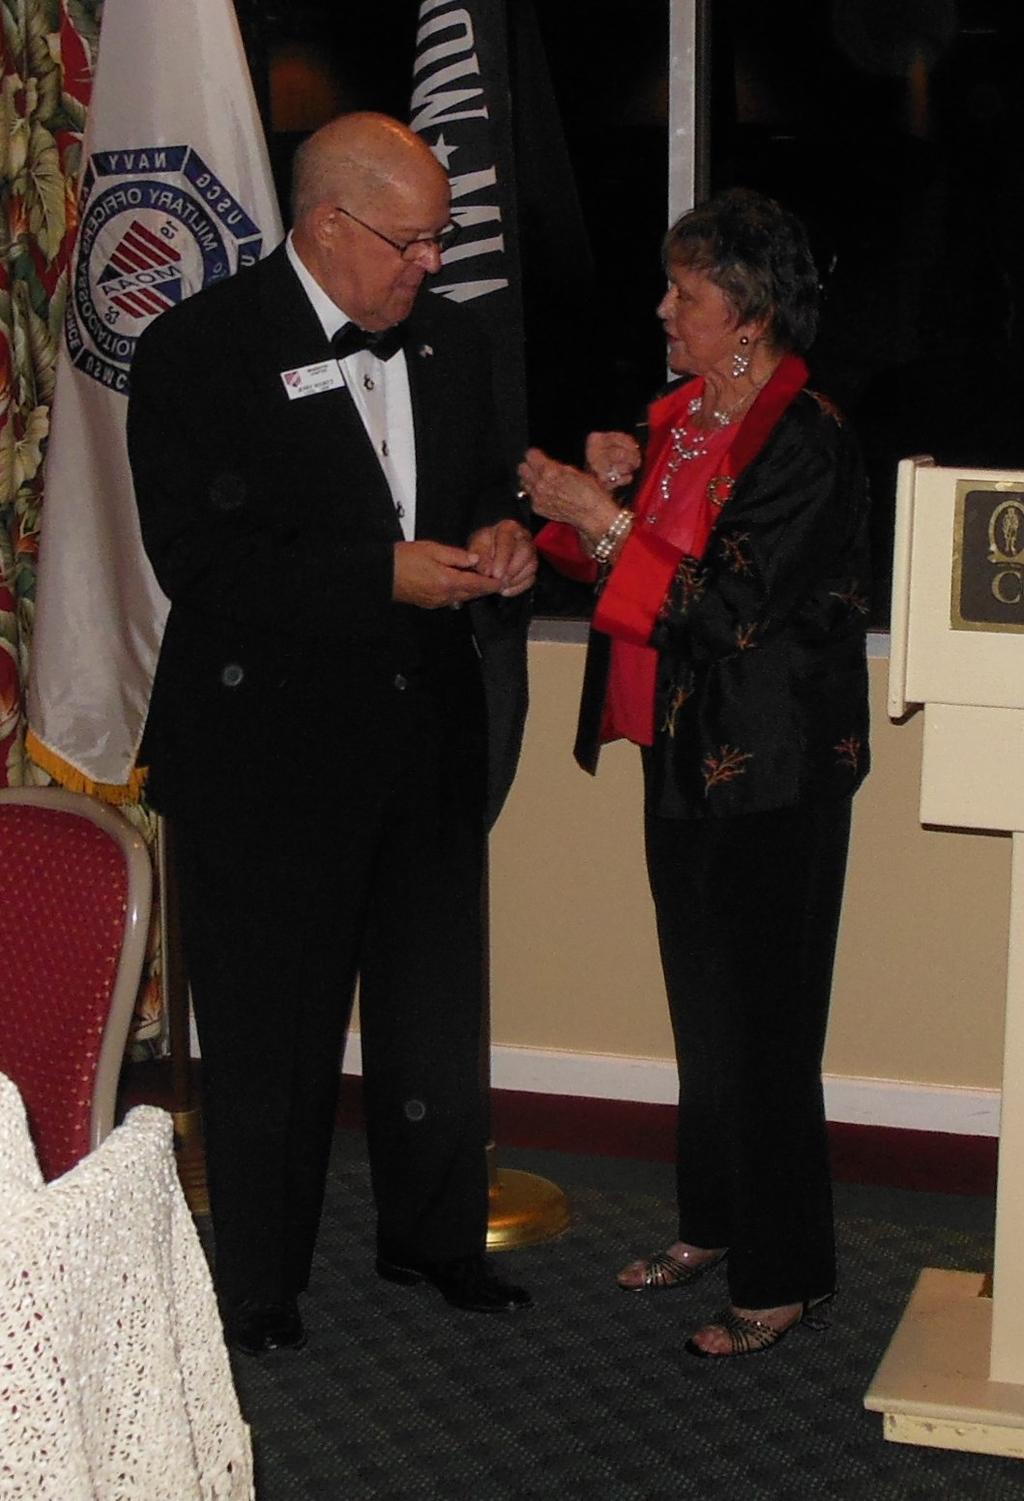 Outgoing President LtCol. Jerry Koontz and New President Mrs. Joyce Harte exchanges old and new president pins.